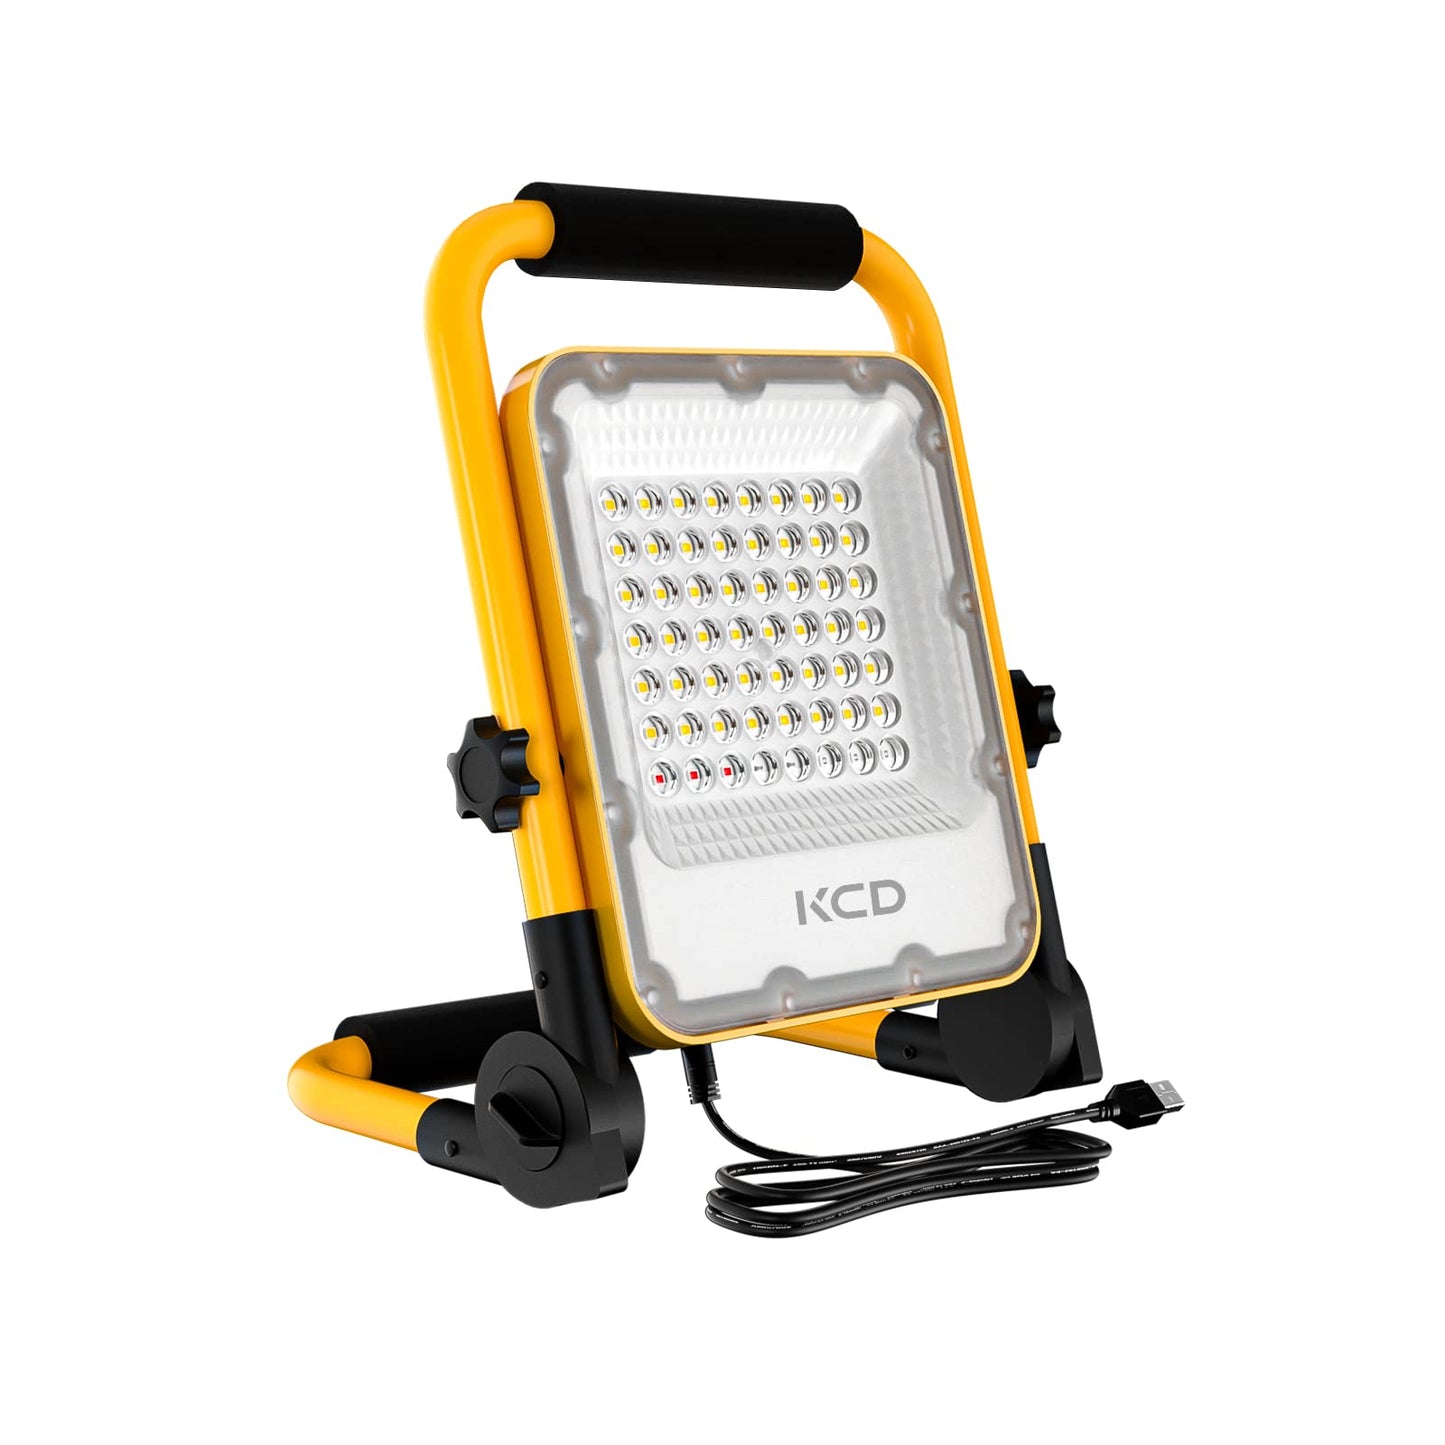 Rechargeable LED Work Light, KCD 30W 3000LM Adjustable Flood Light with Stand IP65 Waterproof Outdoor Construction Job Site Working Light for Garage Workshop Car,Camping, Outdoor Lighting - Like New